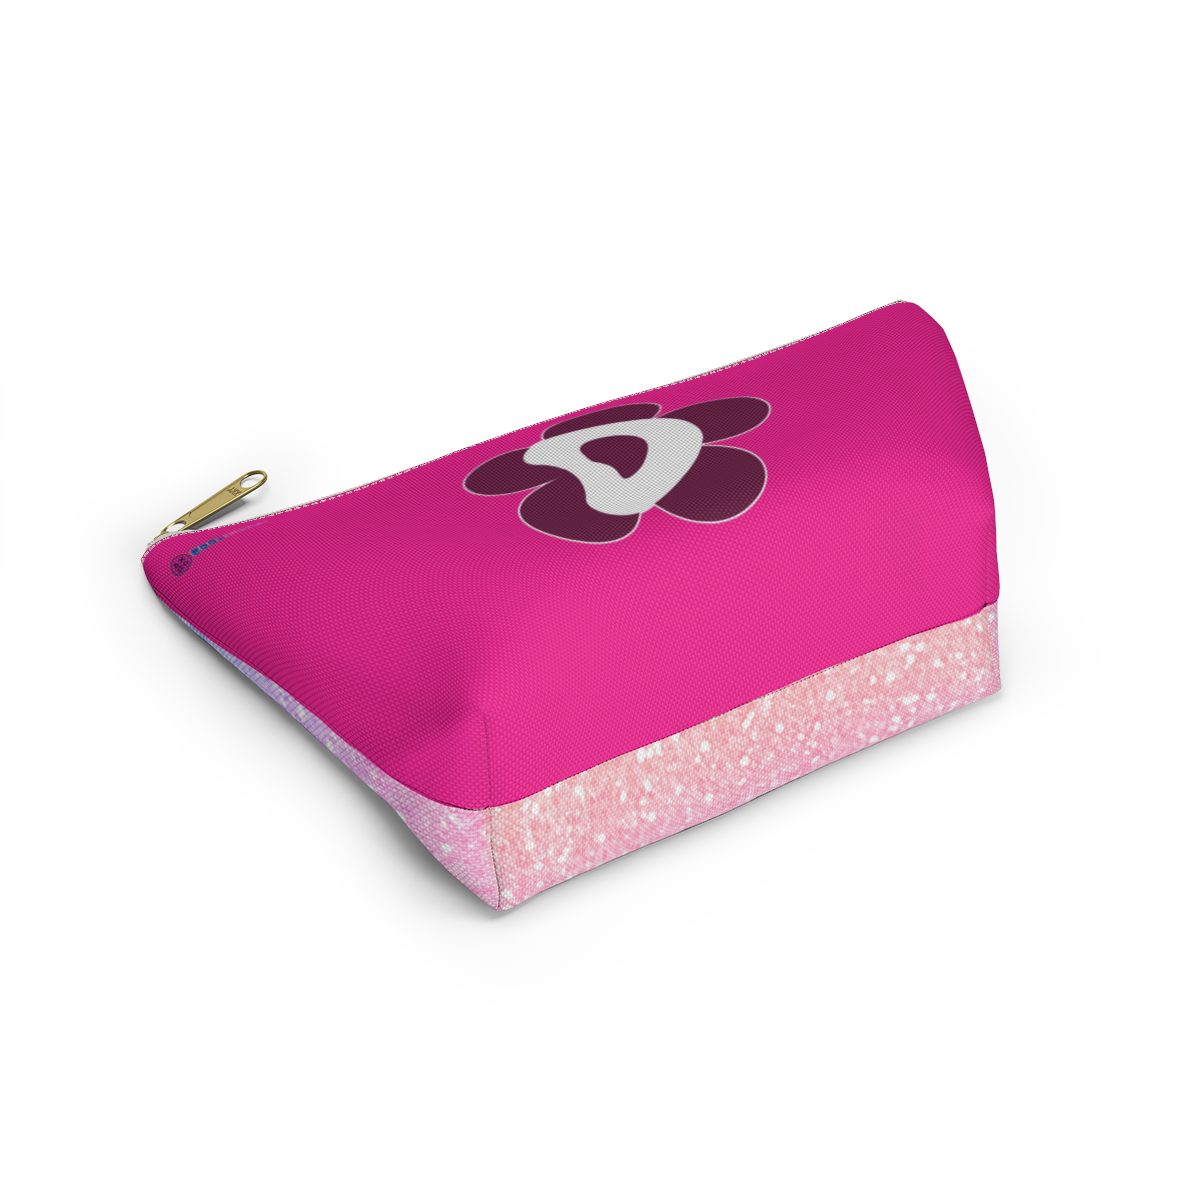 Love Diana Show YouTube Channel Accessory Pouch Cool Kiddo 18